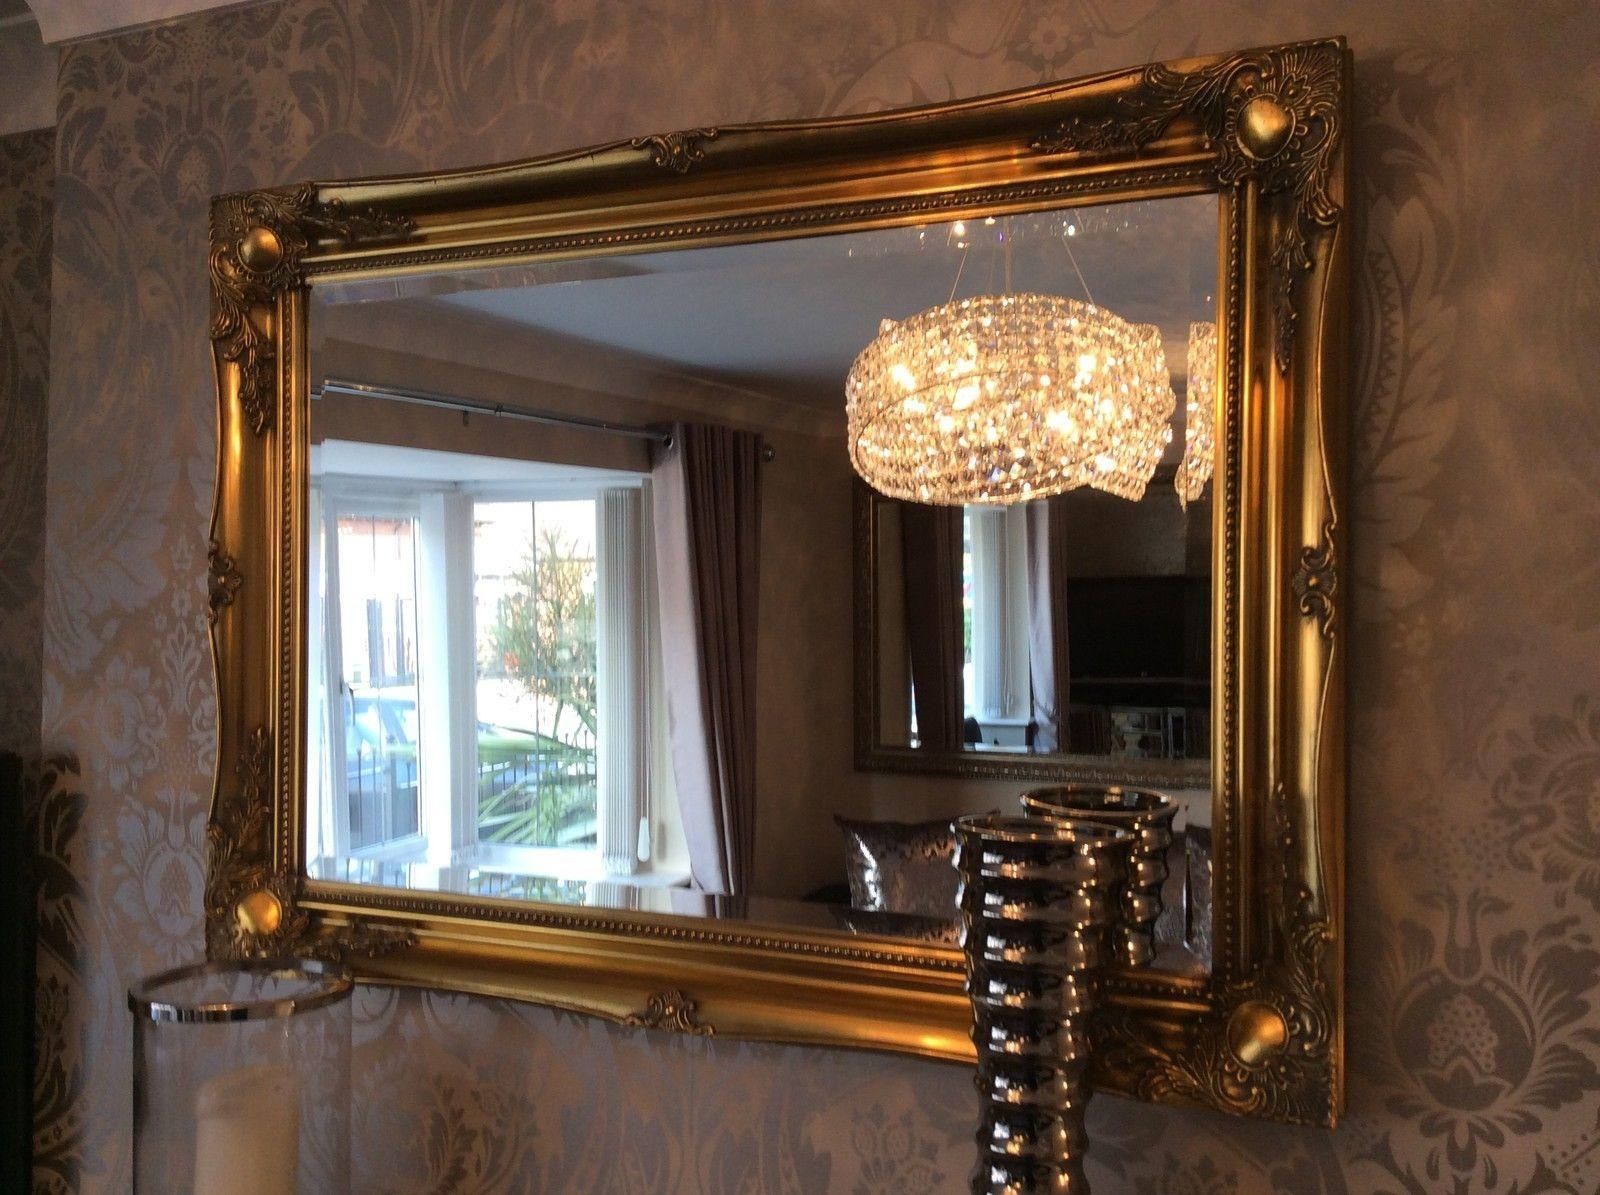 Download Decorative Gold Mirrors | Gen4Congress With Regard To Black Wall Mirrors For Sale (View 13 of 20)